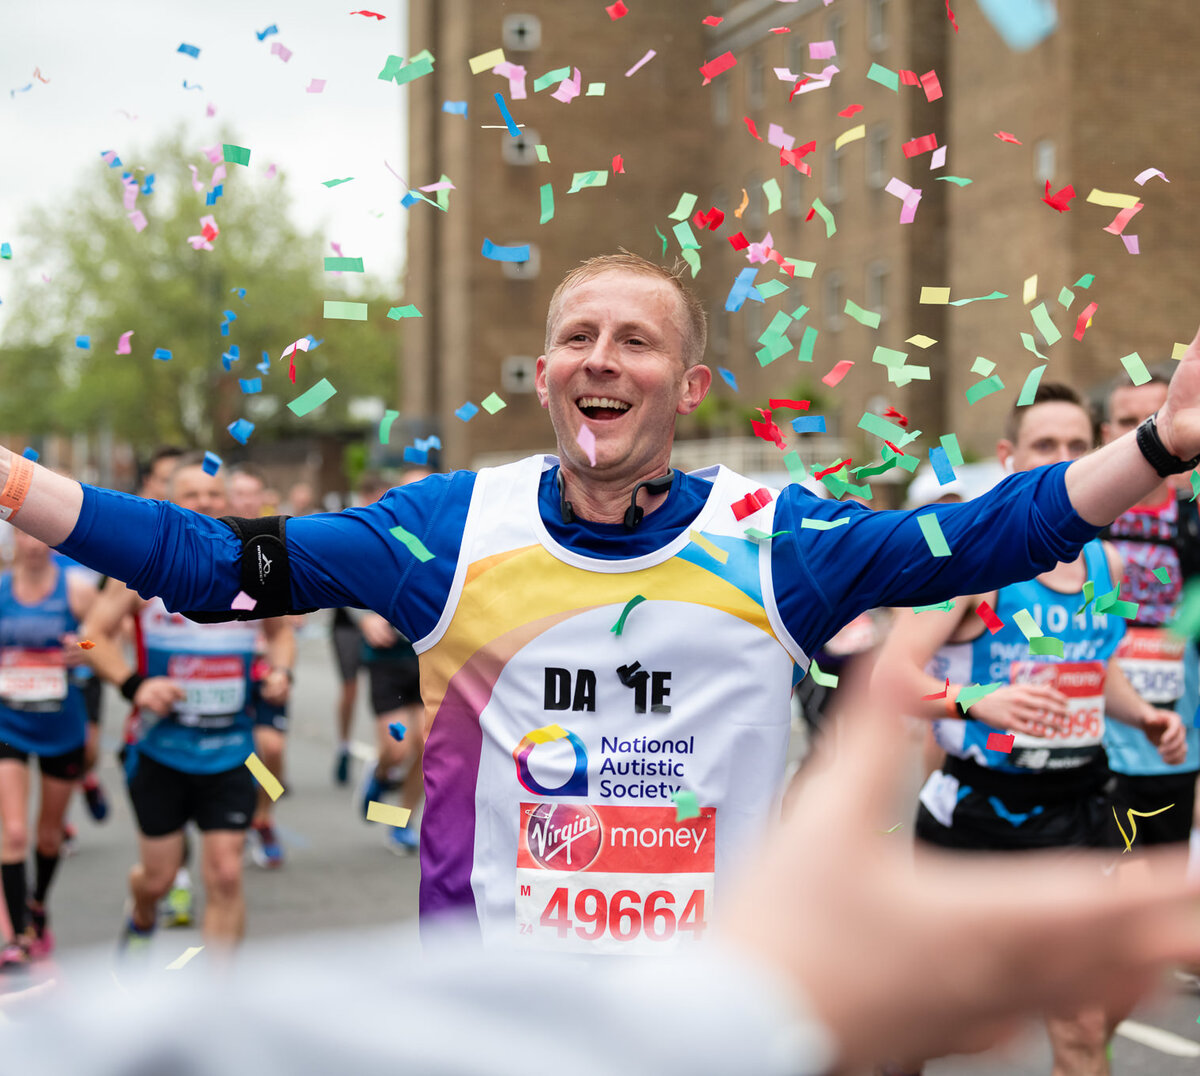 Congratulations to all #TeamAutism runners who did a fantastic job yesterday raising money for the National Autistic Society at the London Marathon! // Photos by www.sportsphotographer.co.uk | @sportsphotographyuk